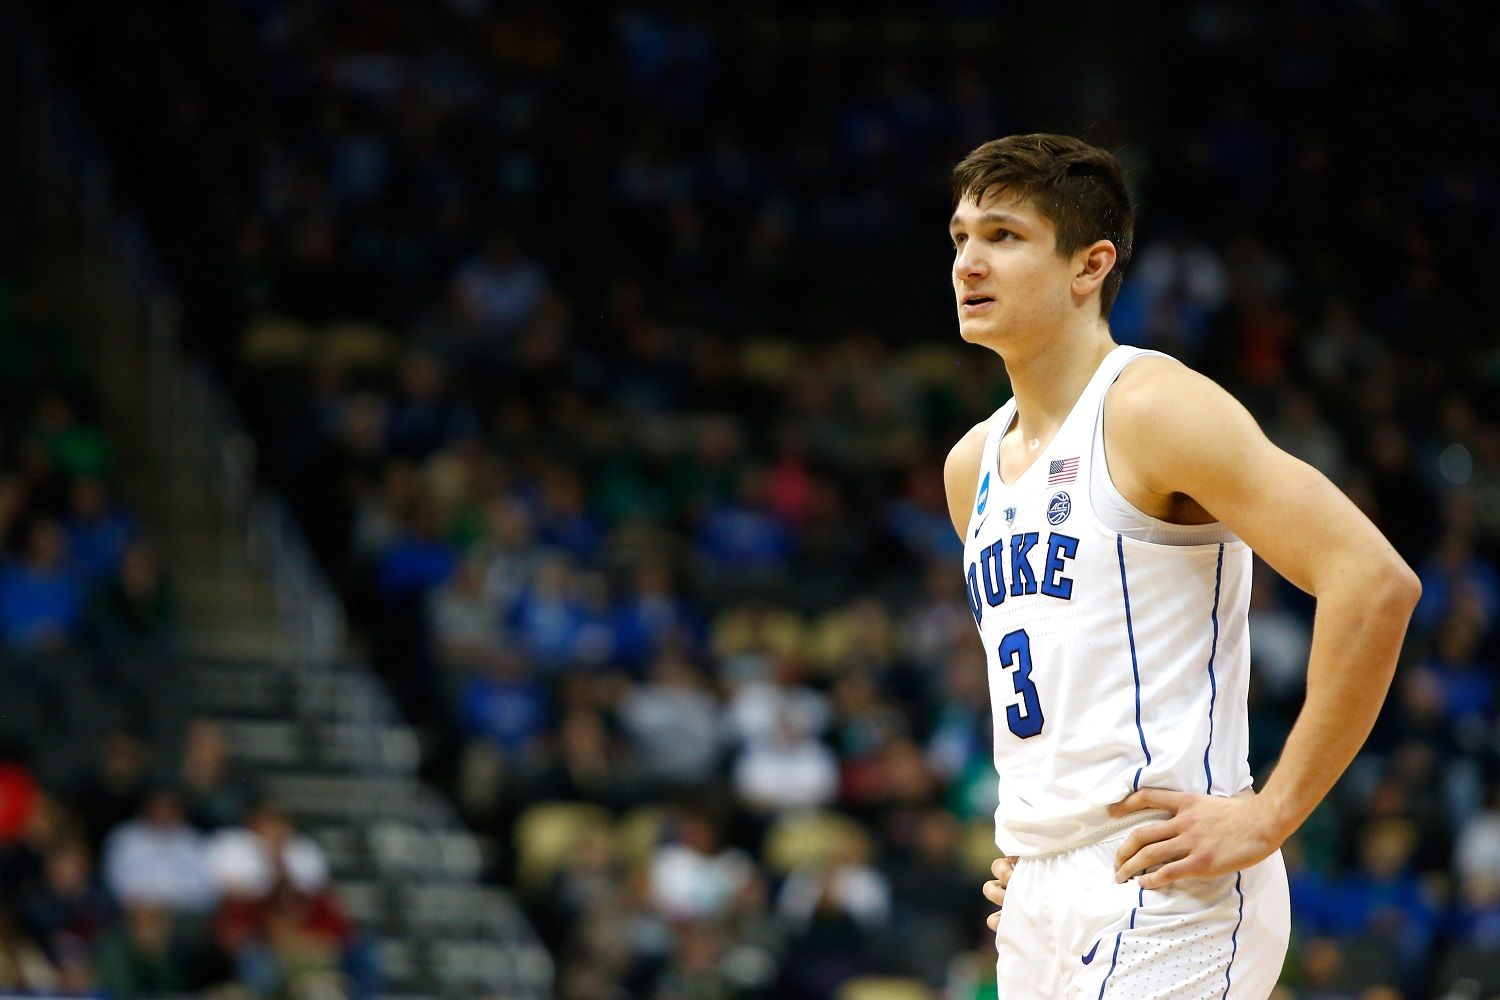 PITTSBURGH, PA - MARCH 17:  Grayson Allen #3 of the Duke Blue Devils looks on against the Rhode Island Rams during the second half in the second round of the 2018 NCAA Men's Basketball Tournament at PPG PAINTS Arena on March 17, 2018 in Pittsburgh, Pennsylvania.  (Photo by Justin K. Aller/Getty Images)